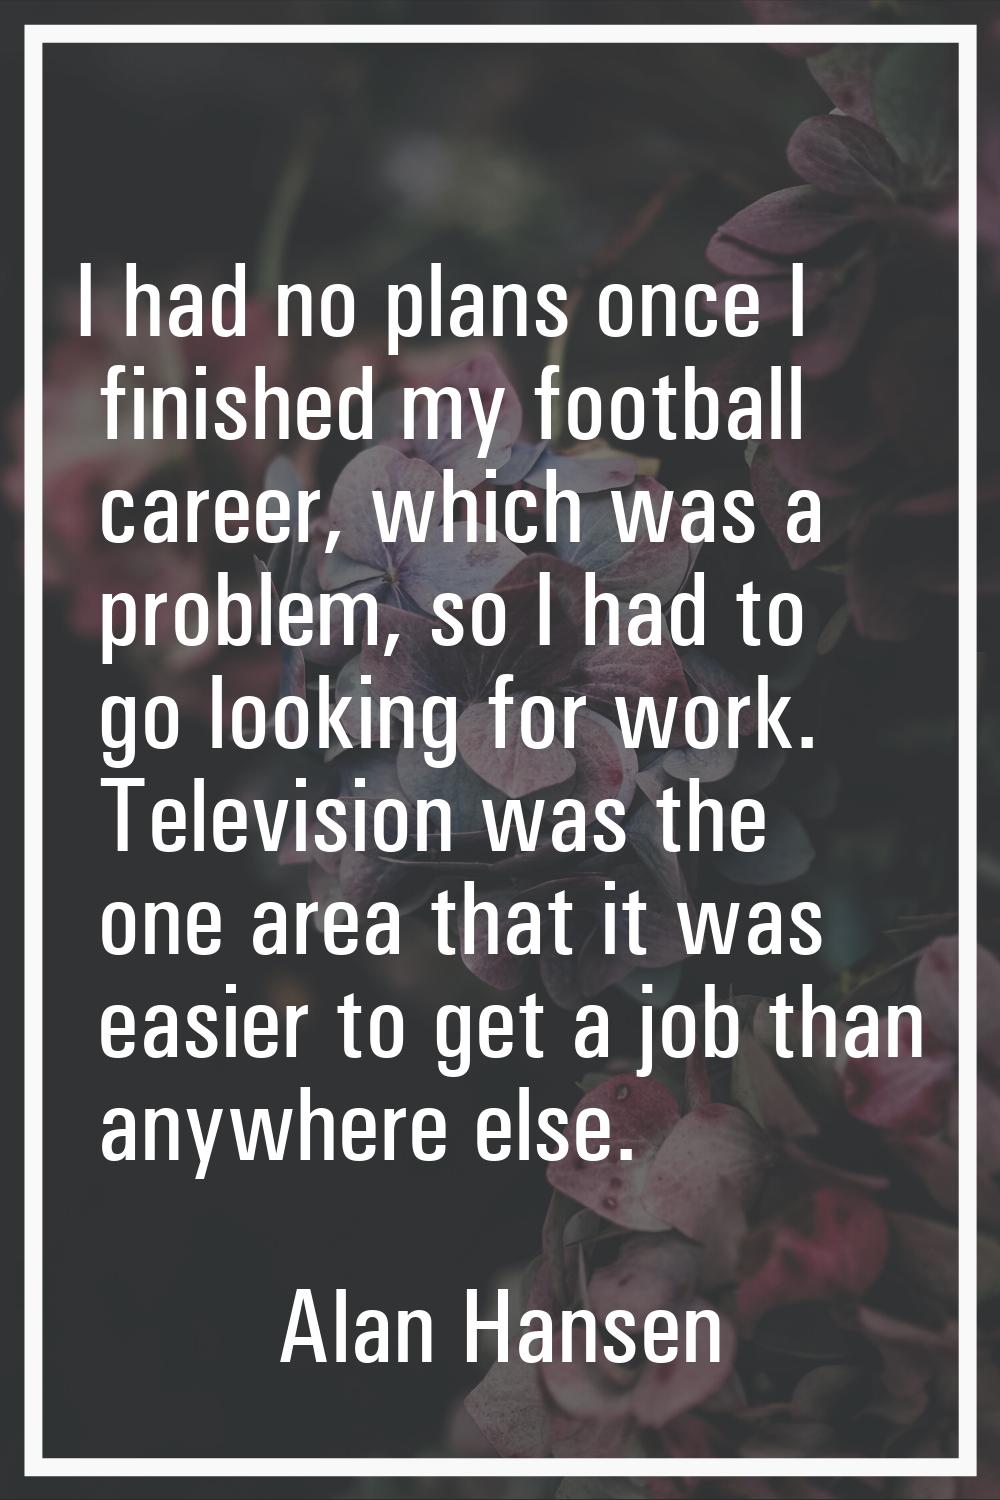 I had no plans once I finished my football career, which was a problem, so I had to go looking for 